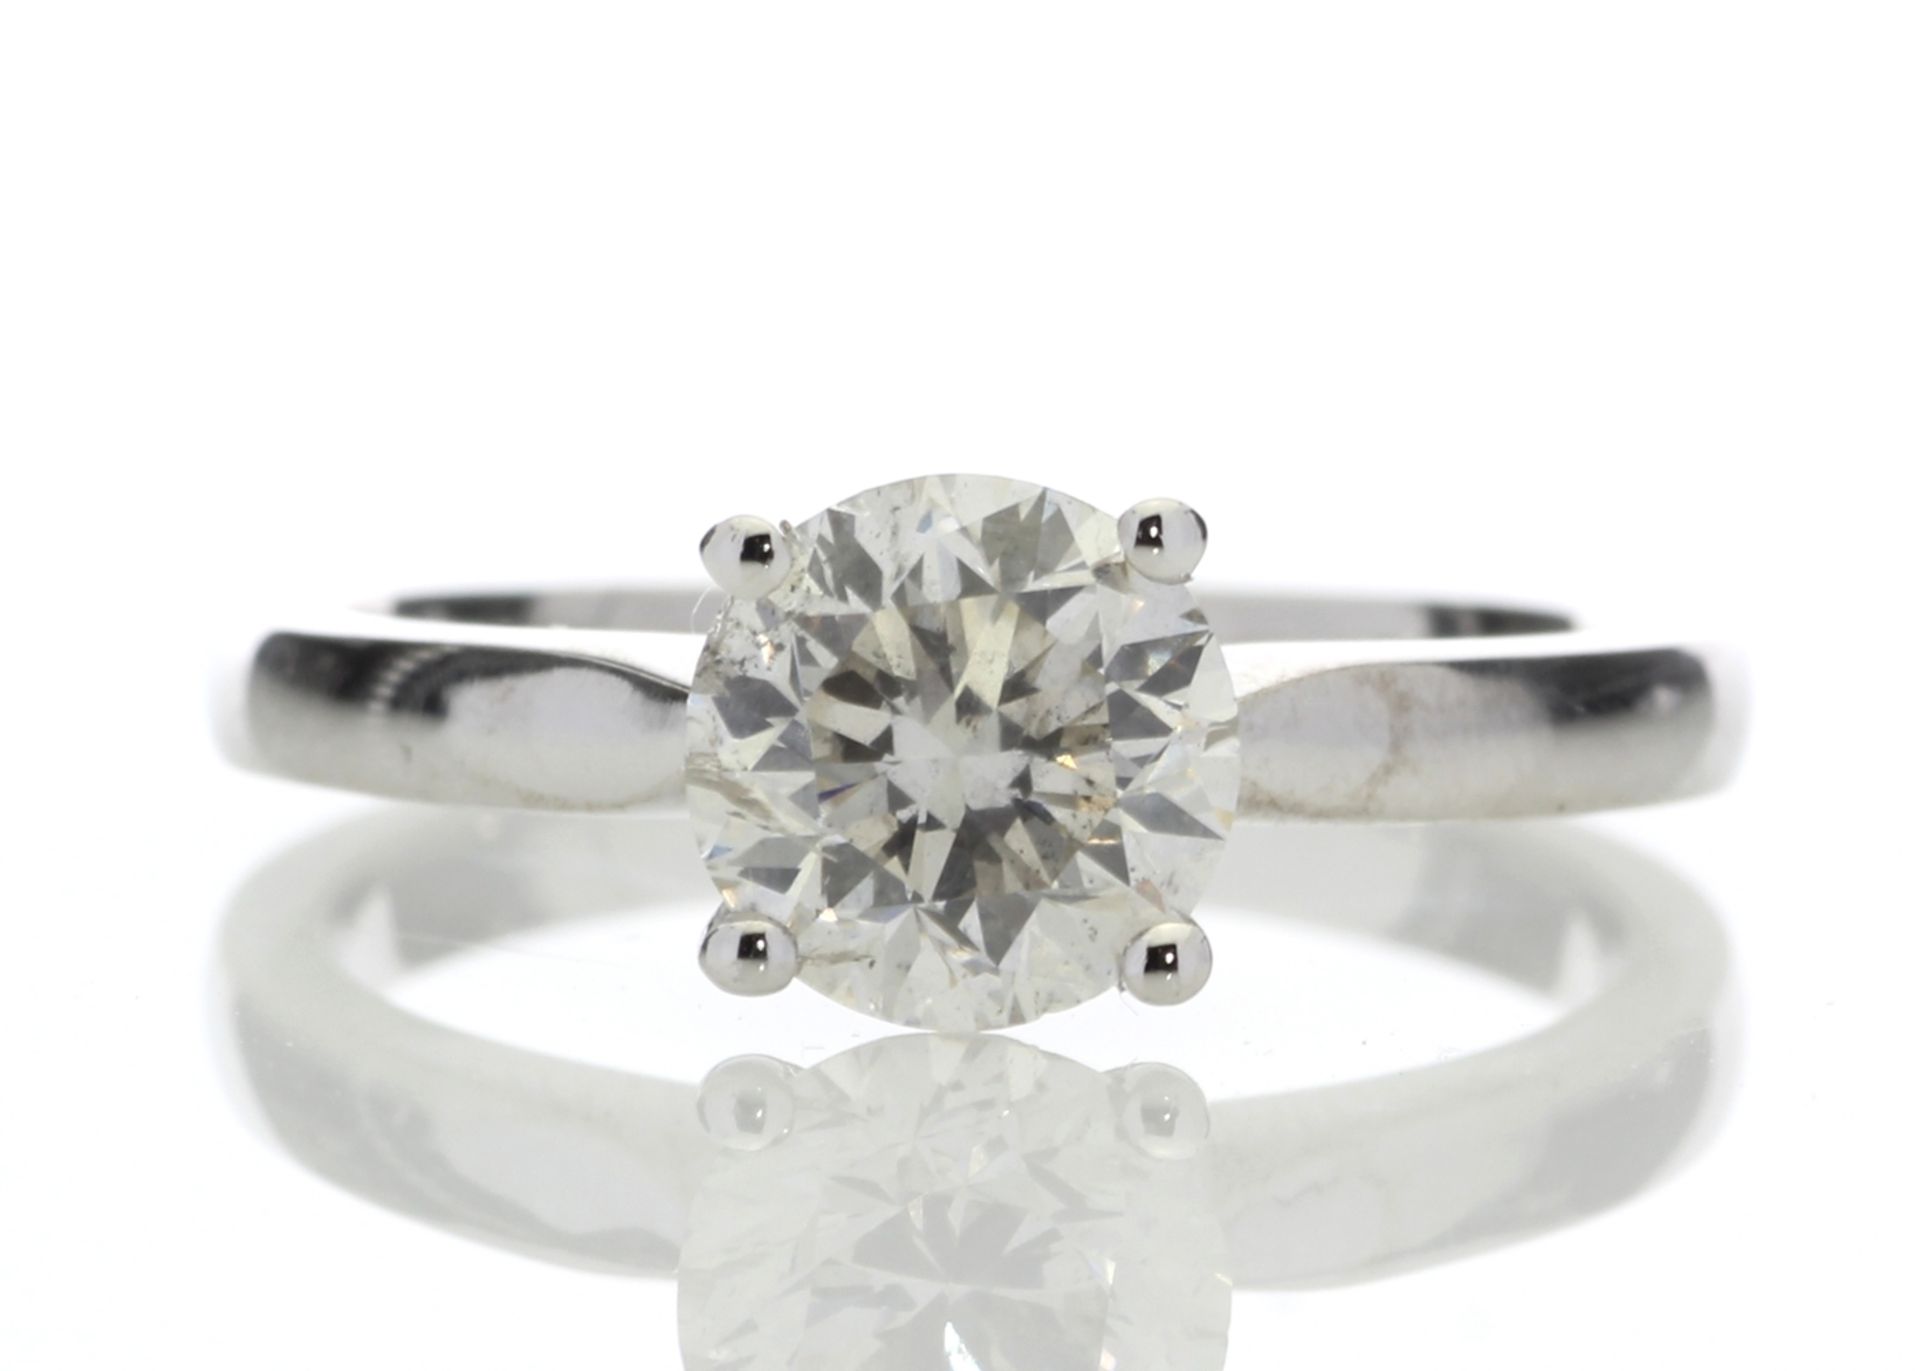 18ct White Gold Claw Set Diamond Ring 1.24 Carats - Valued By GIE £28,115.00 - A beautiful and